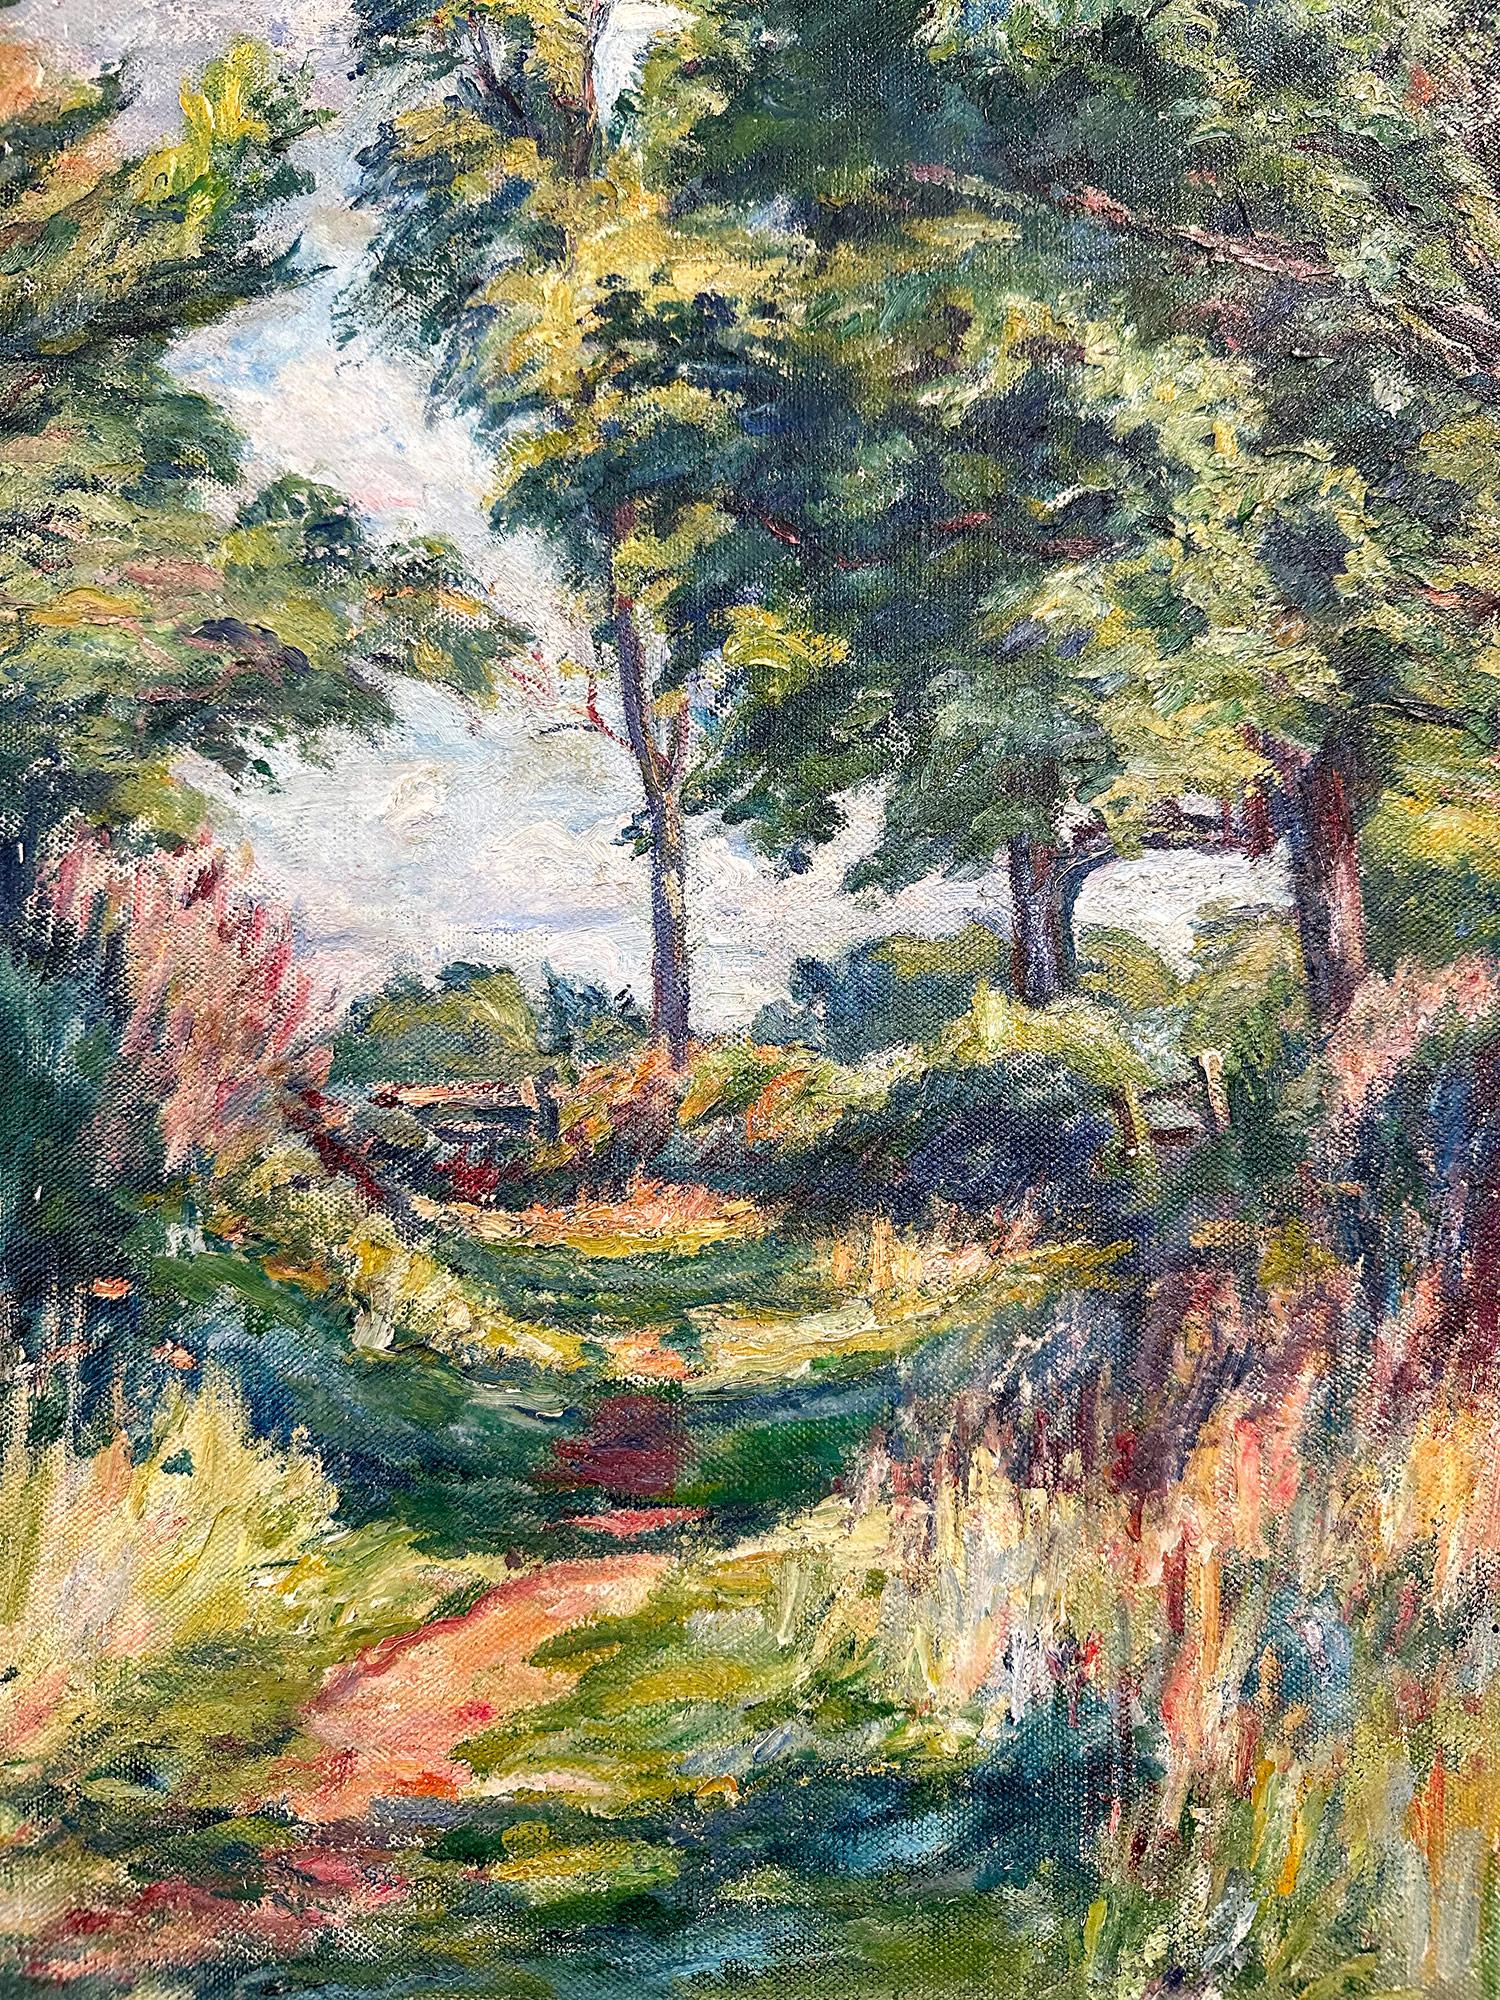 This piece is a pertinent example of Charles Genge most sought after works, depicting a colorful view of the Forest. As a British Post Impressionist artist, most of Genge's works were produced in the Early 20th Century, between 1900- 1920, with this